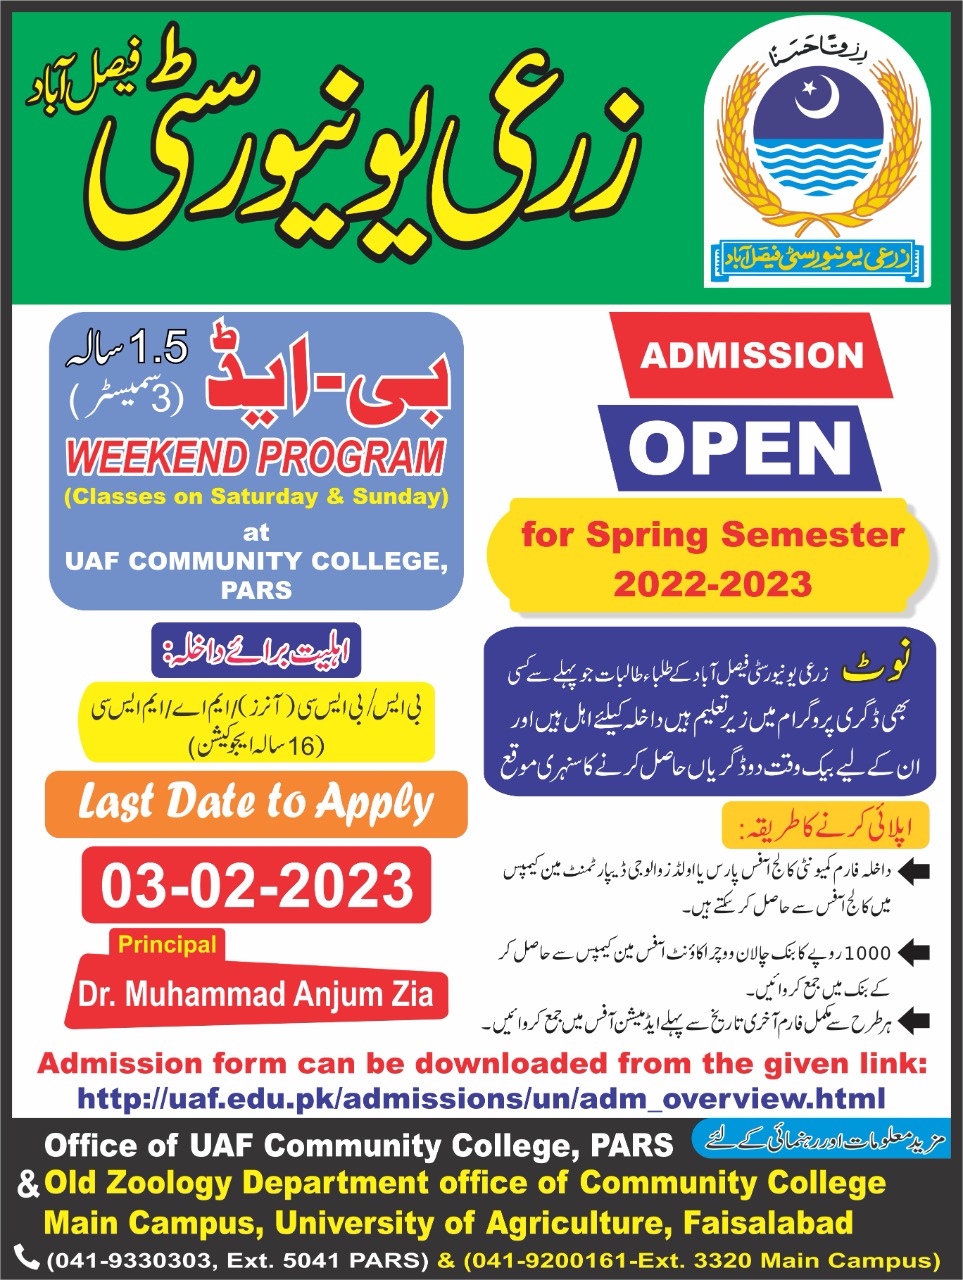 B.ed admission in Agriculture University